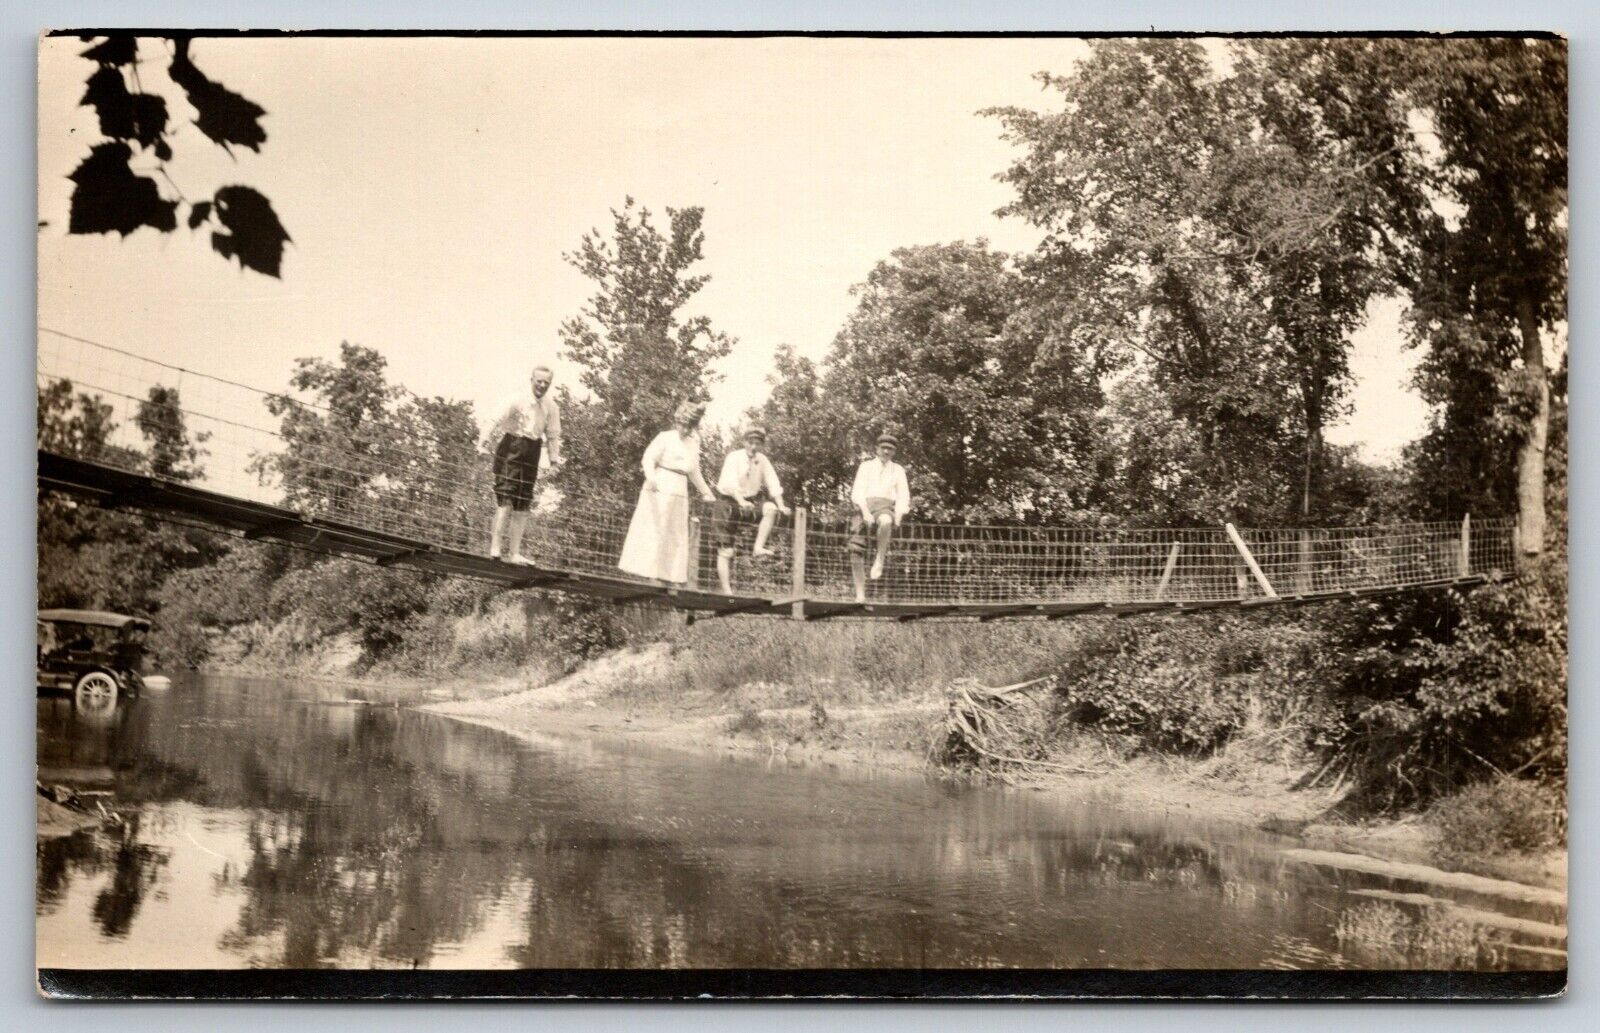 c 1910s RPPC Swimmers People Foot Bridge with Car in Water Real Photo Postcard